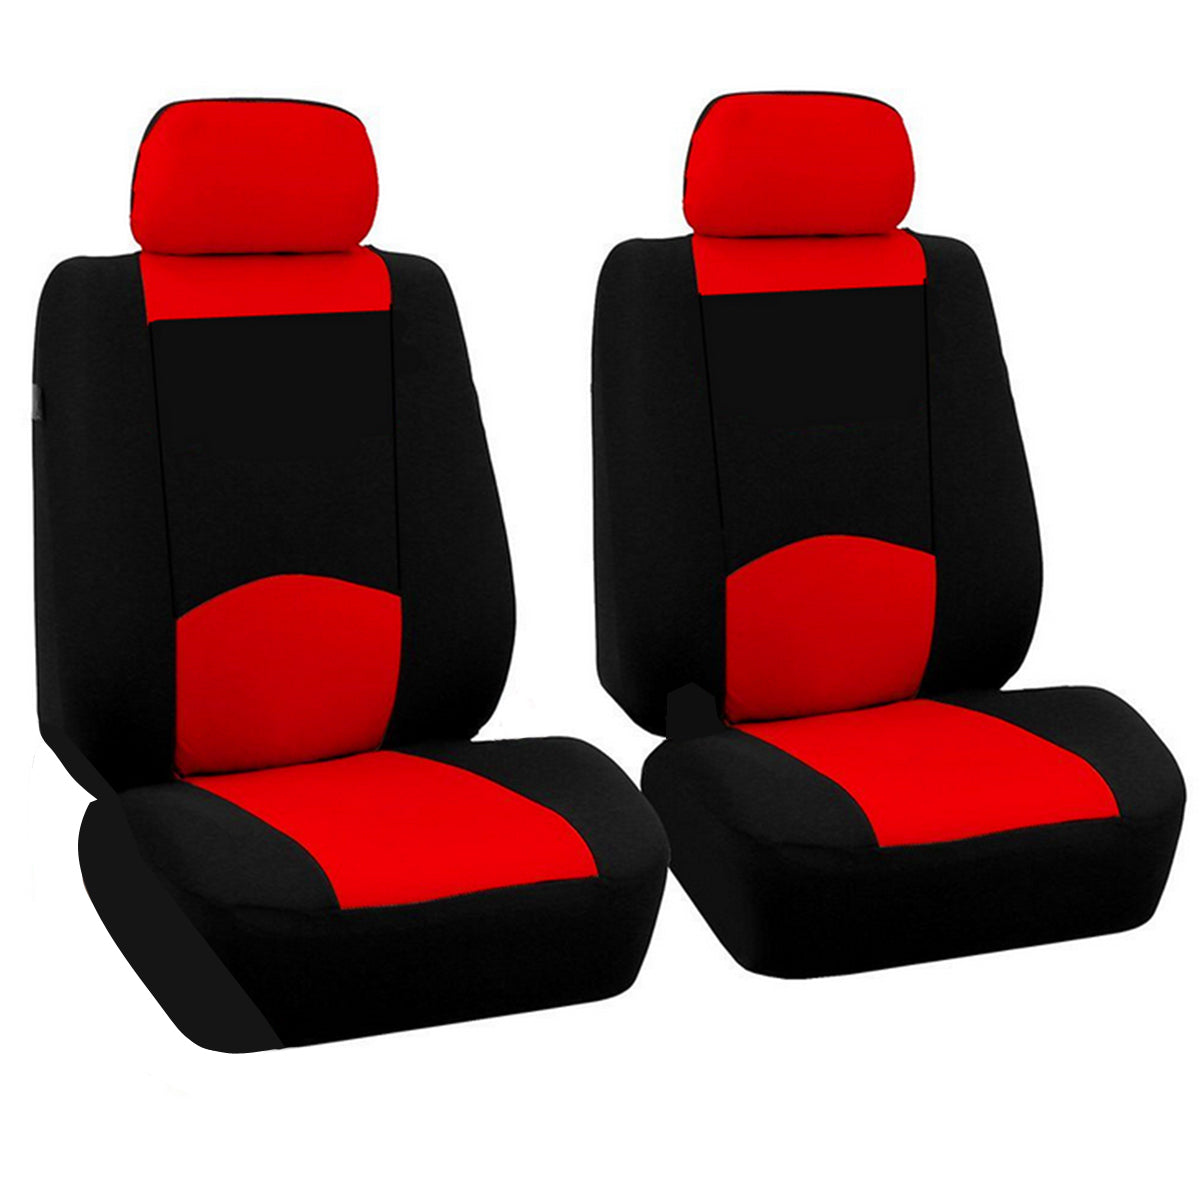 Firebrick Full Set Car Seat Cover Polyester For Auto Truck SUV 2 Heads 2MM Foam Filled Polyester Fabric